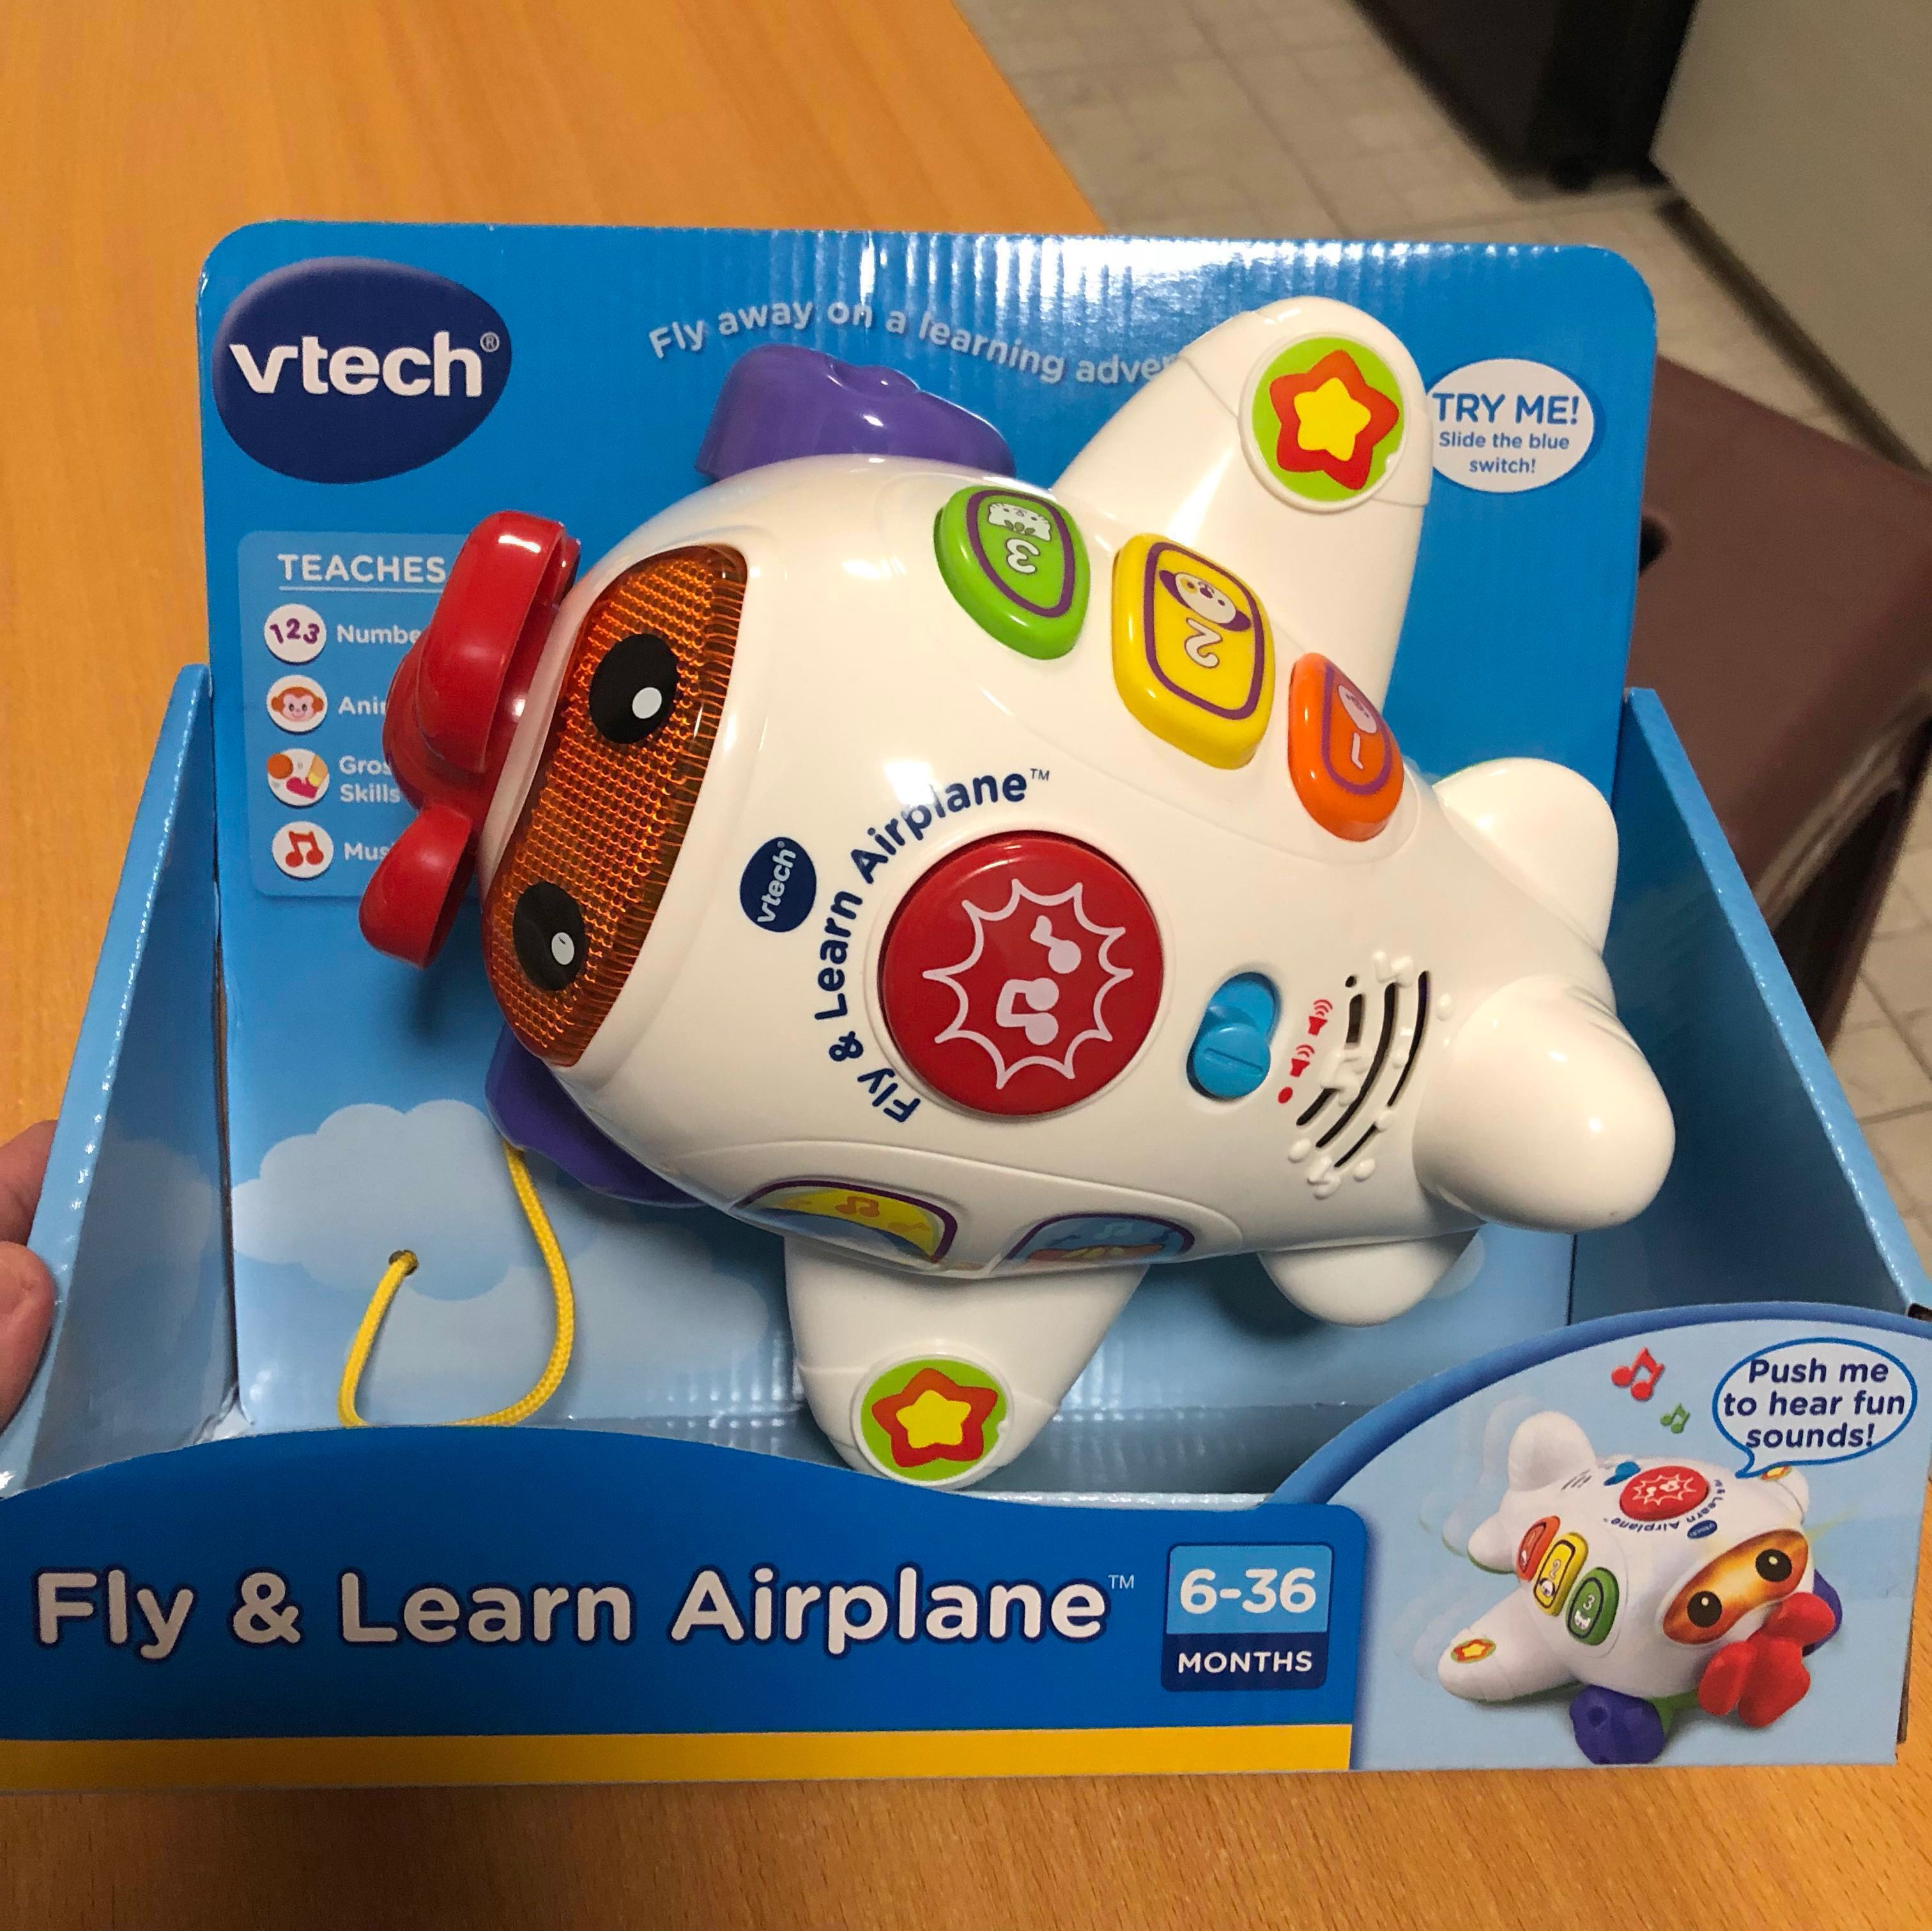 vtech fly and learn airplane